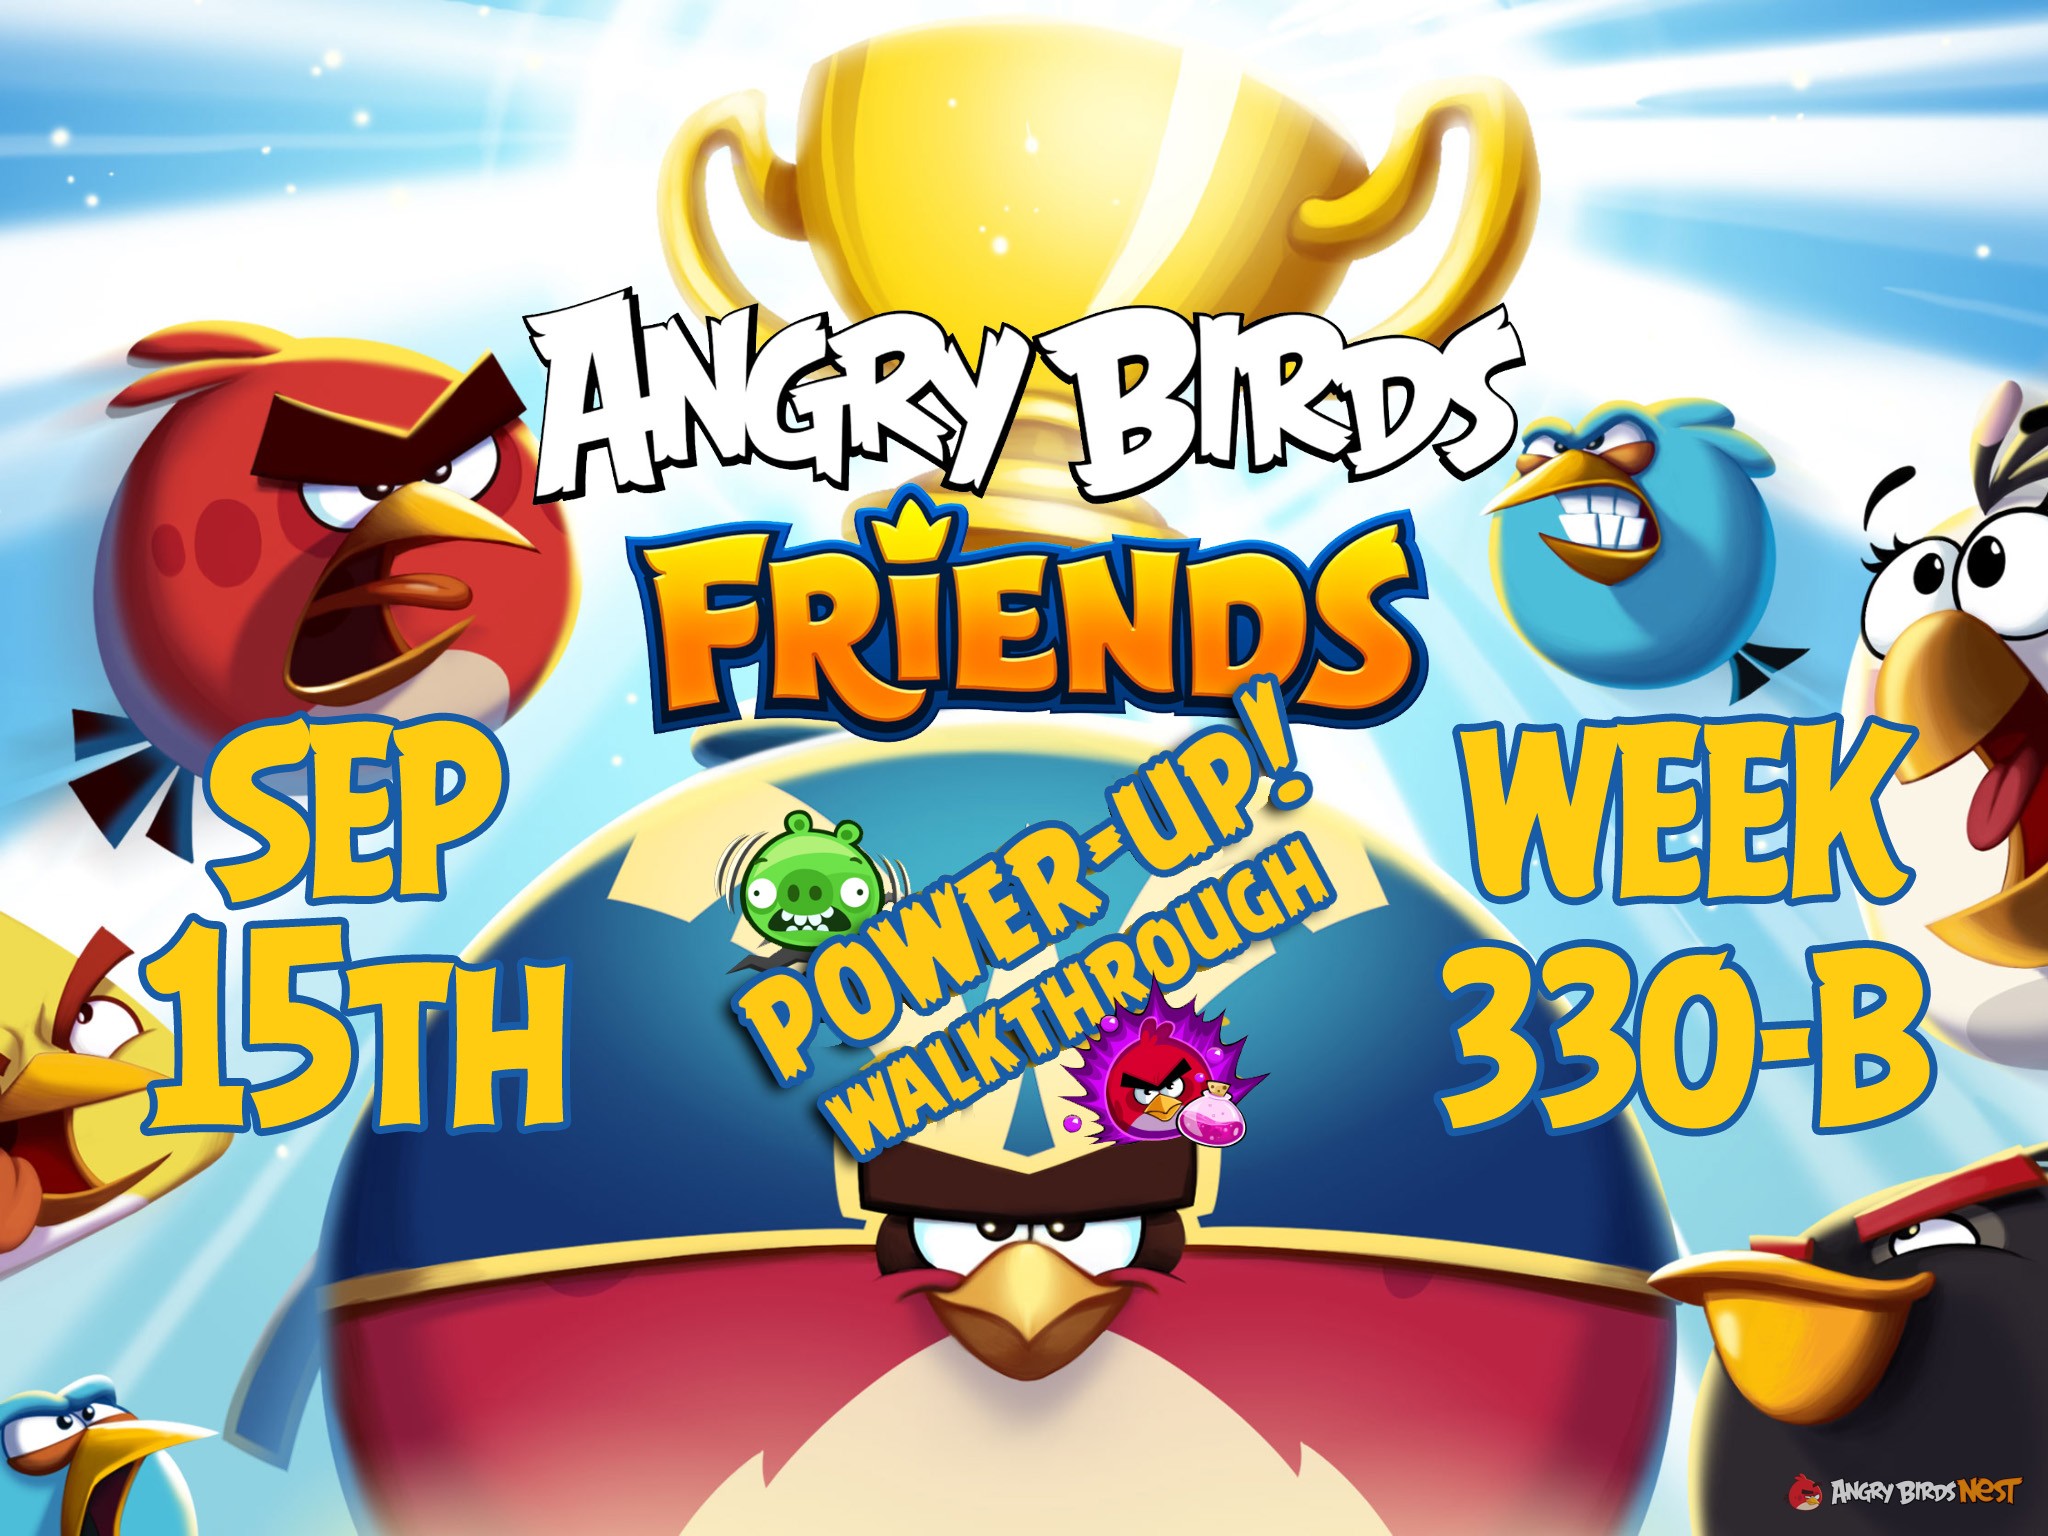 Angry-Birds-Friends-Tournament-Week-330-B-Feature-Image-PU